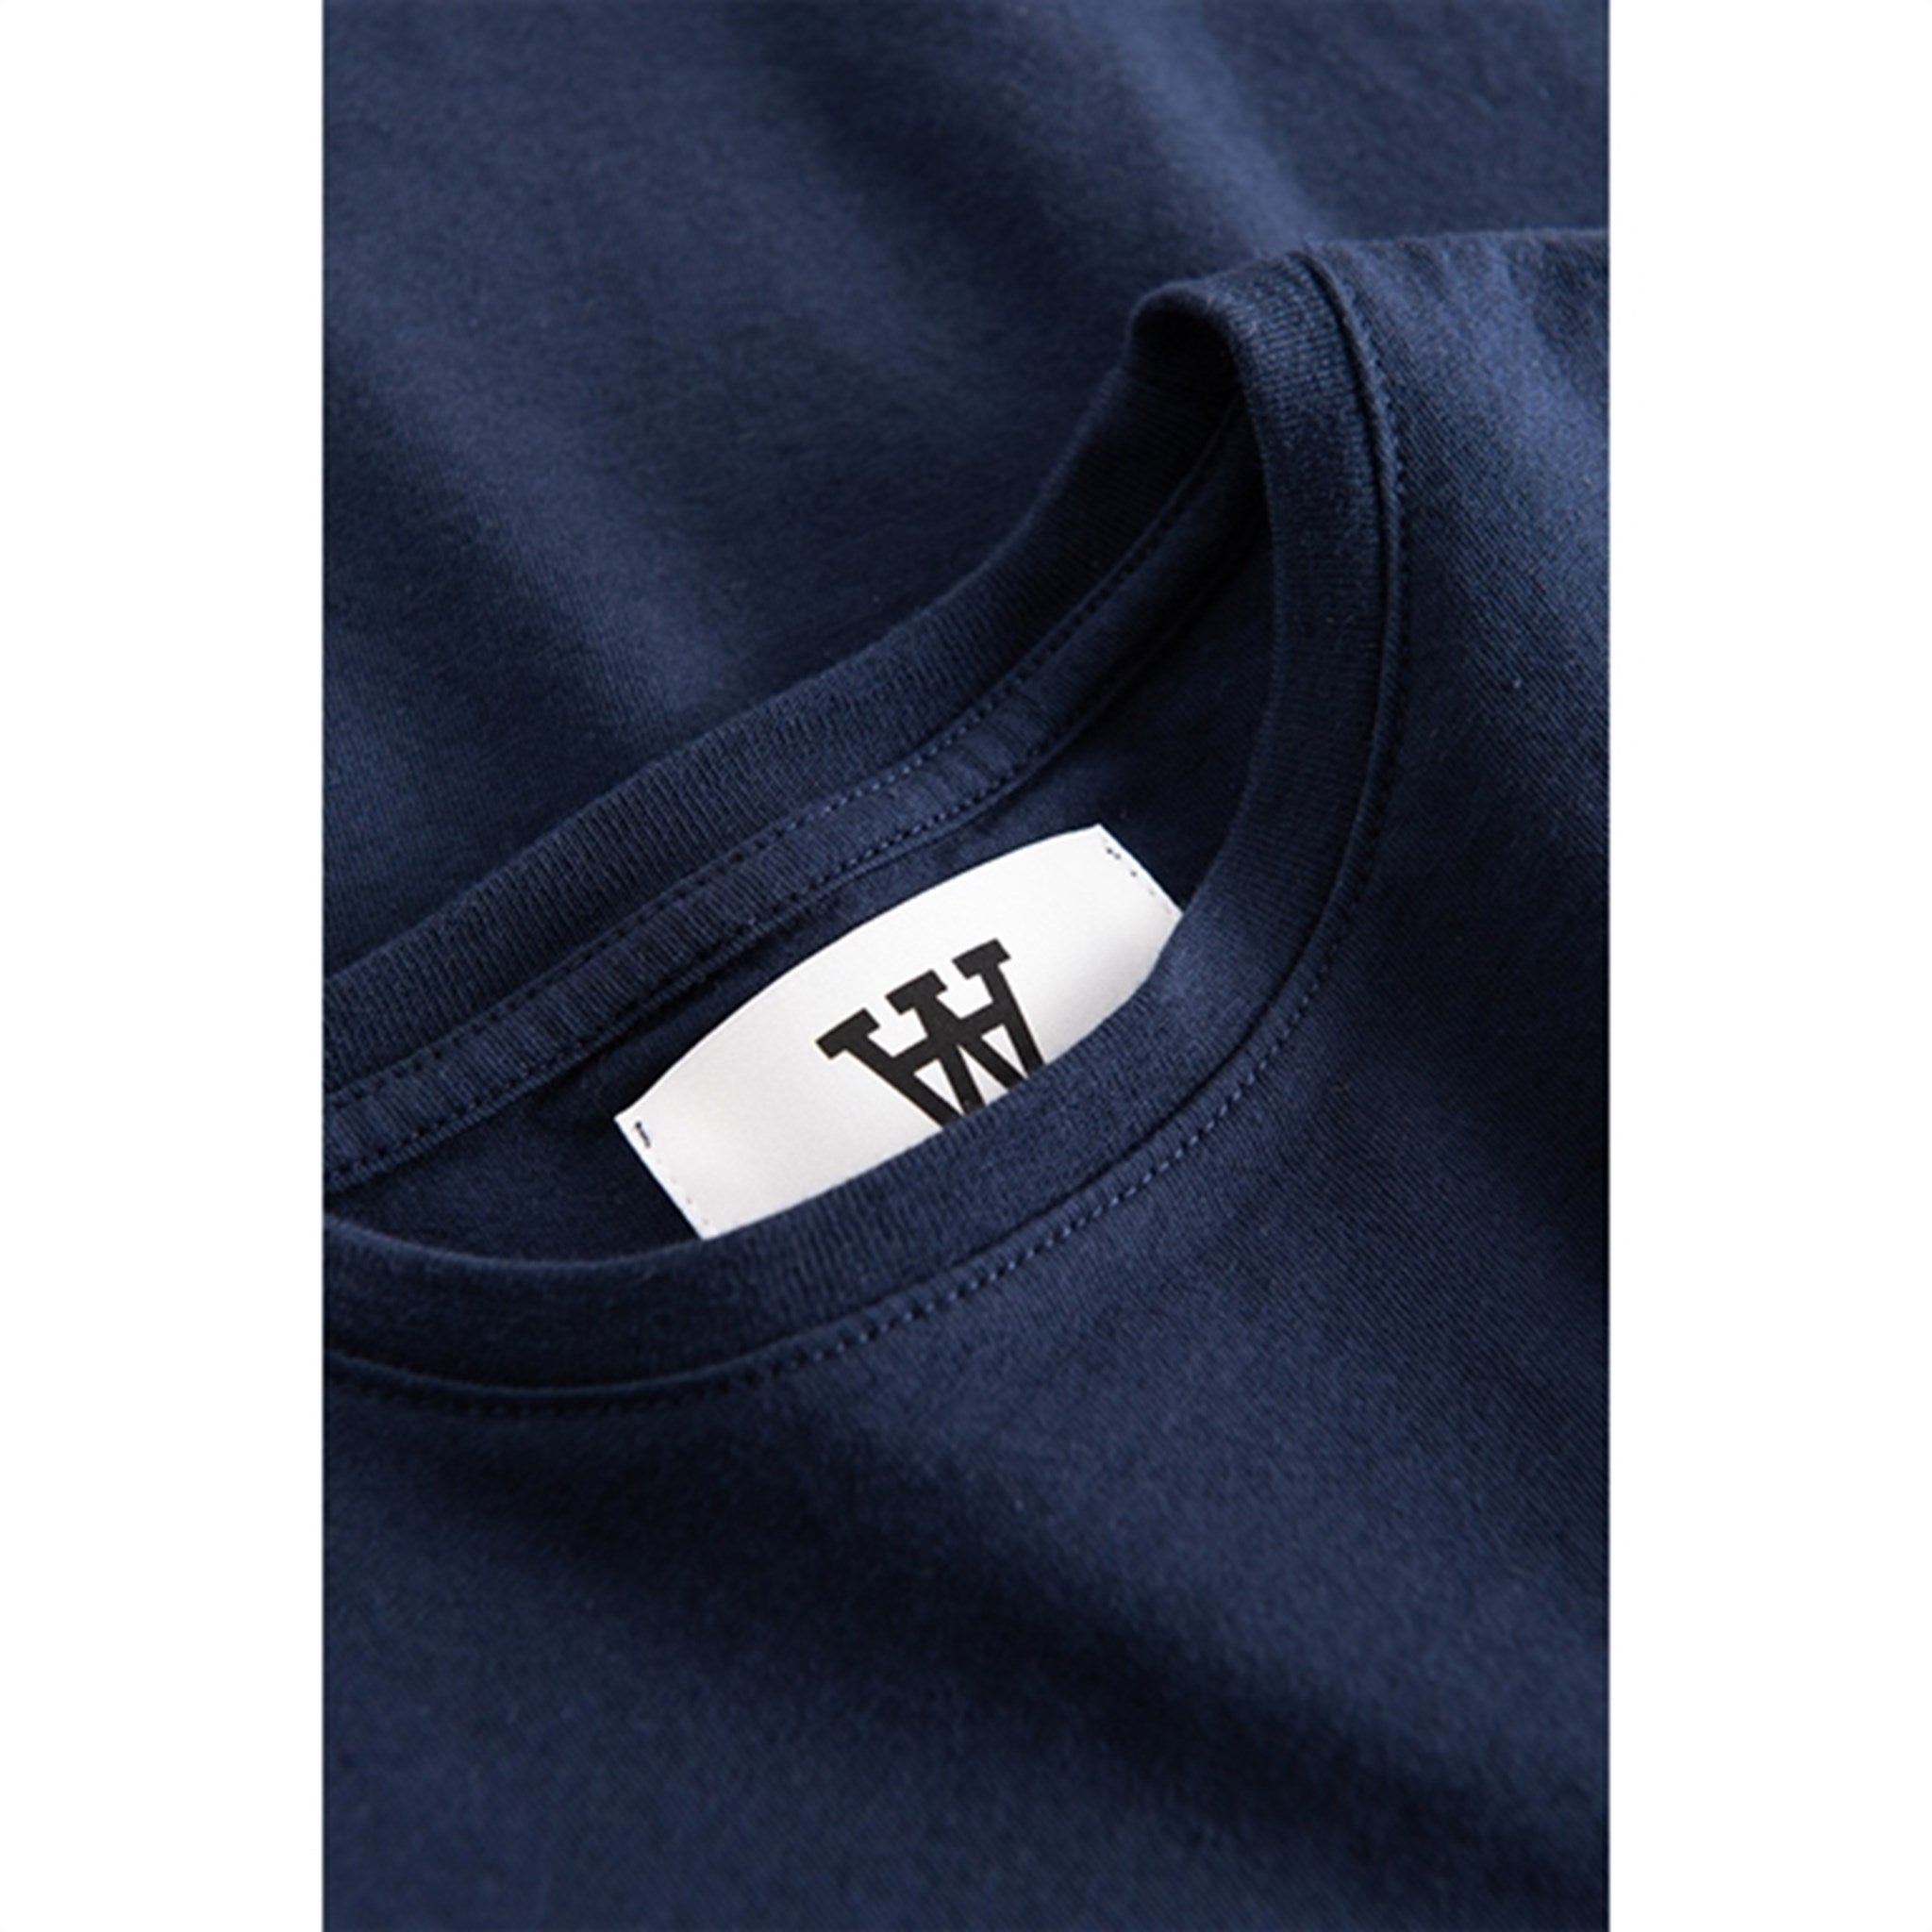 Wood Wood Navy Ola Spell Out Logo T-shirt 4